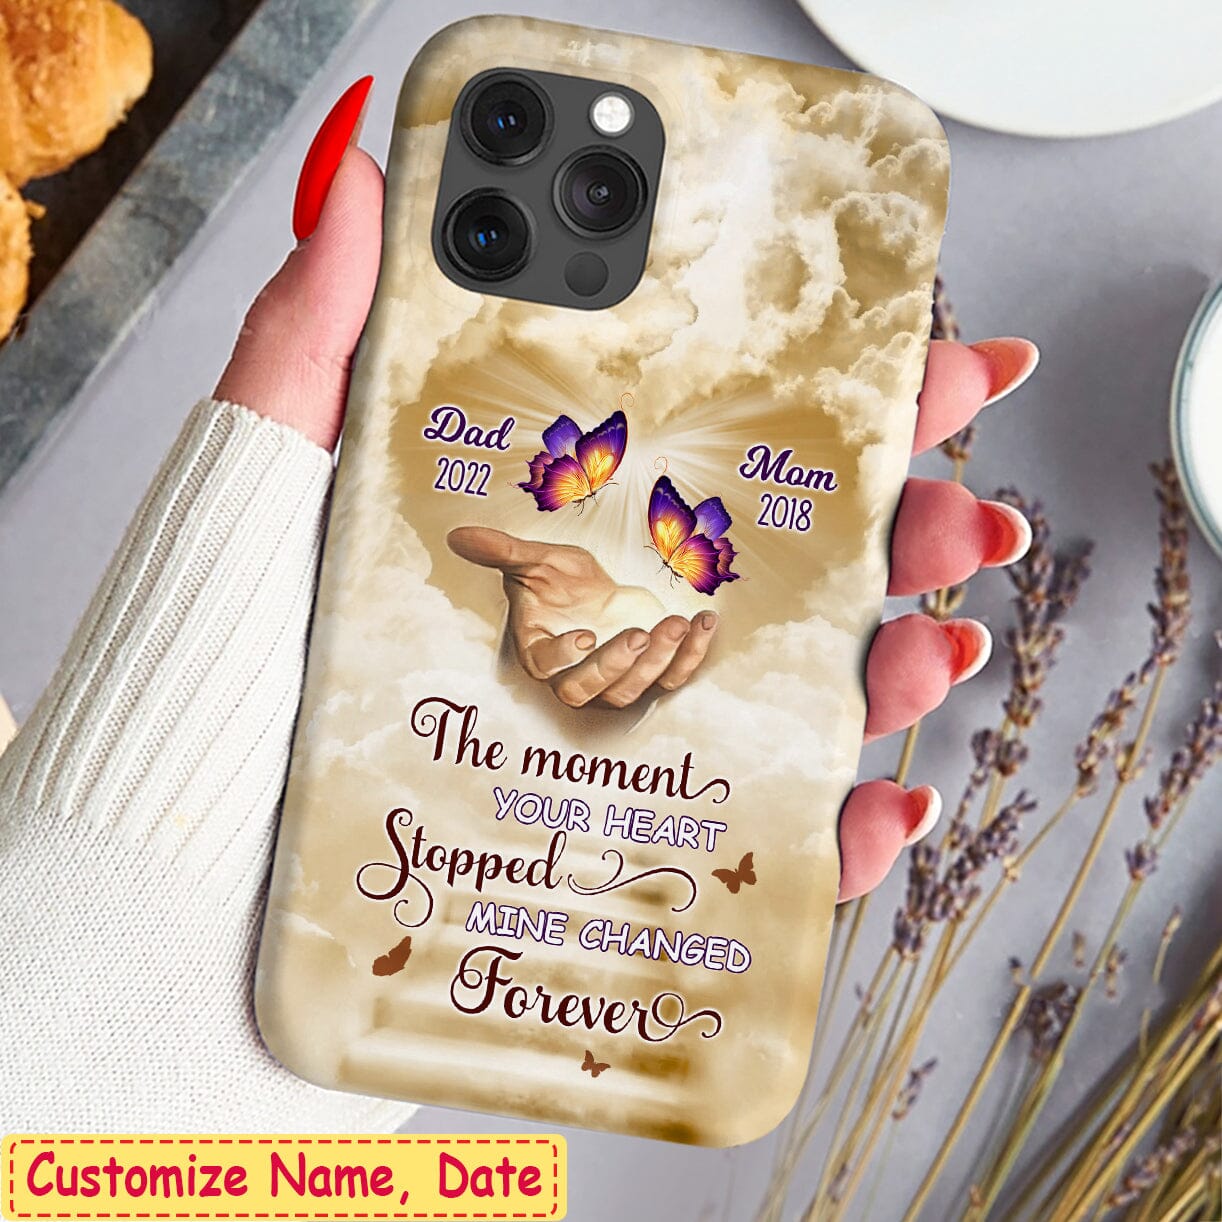 The Moment Your Heart Stopped, Mine Changed Forever Personalized Memorial Phonecase